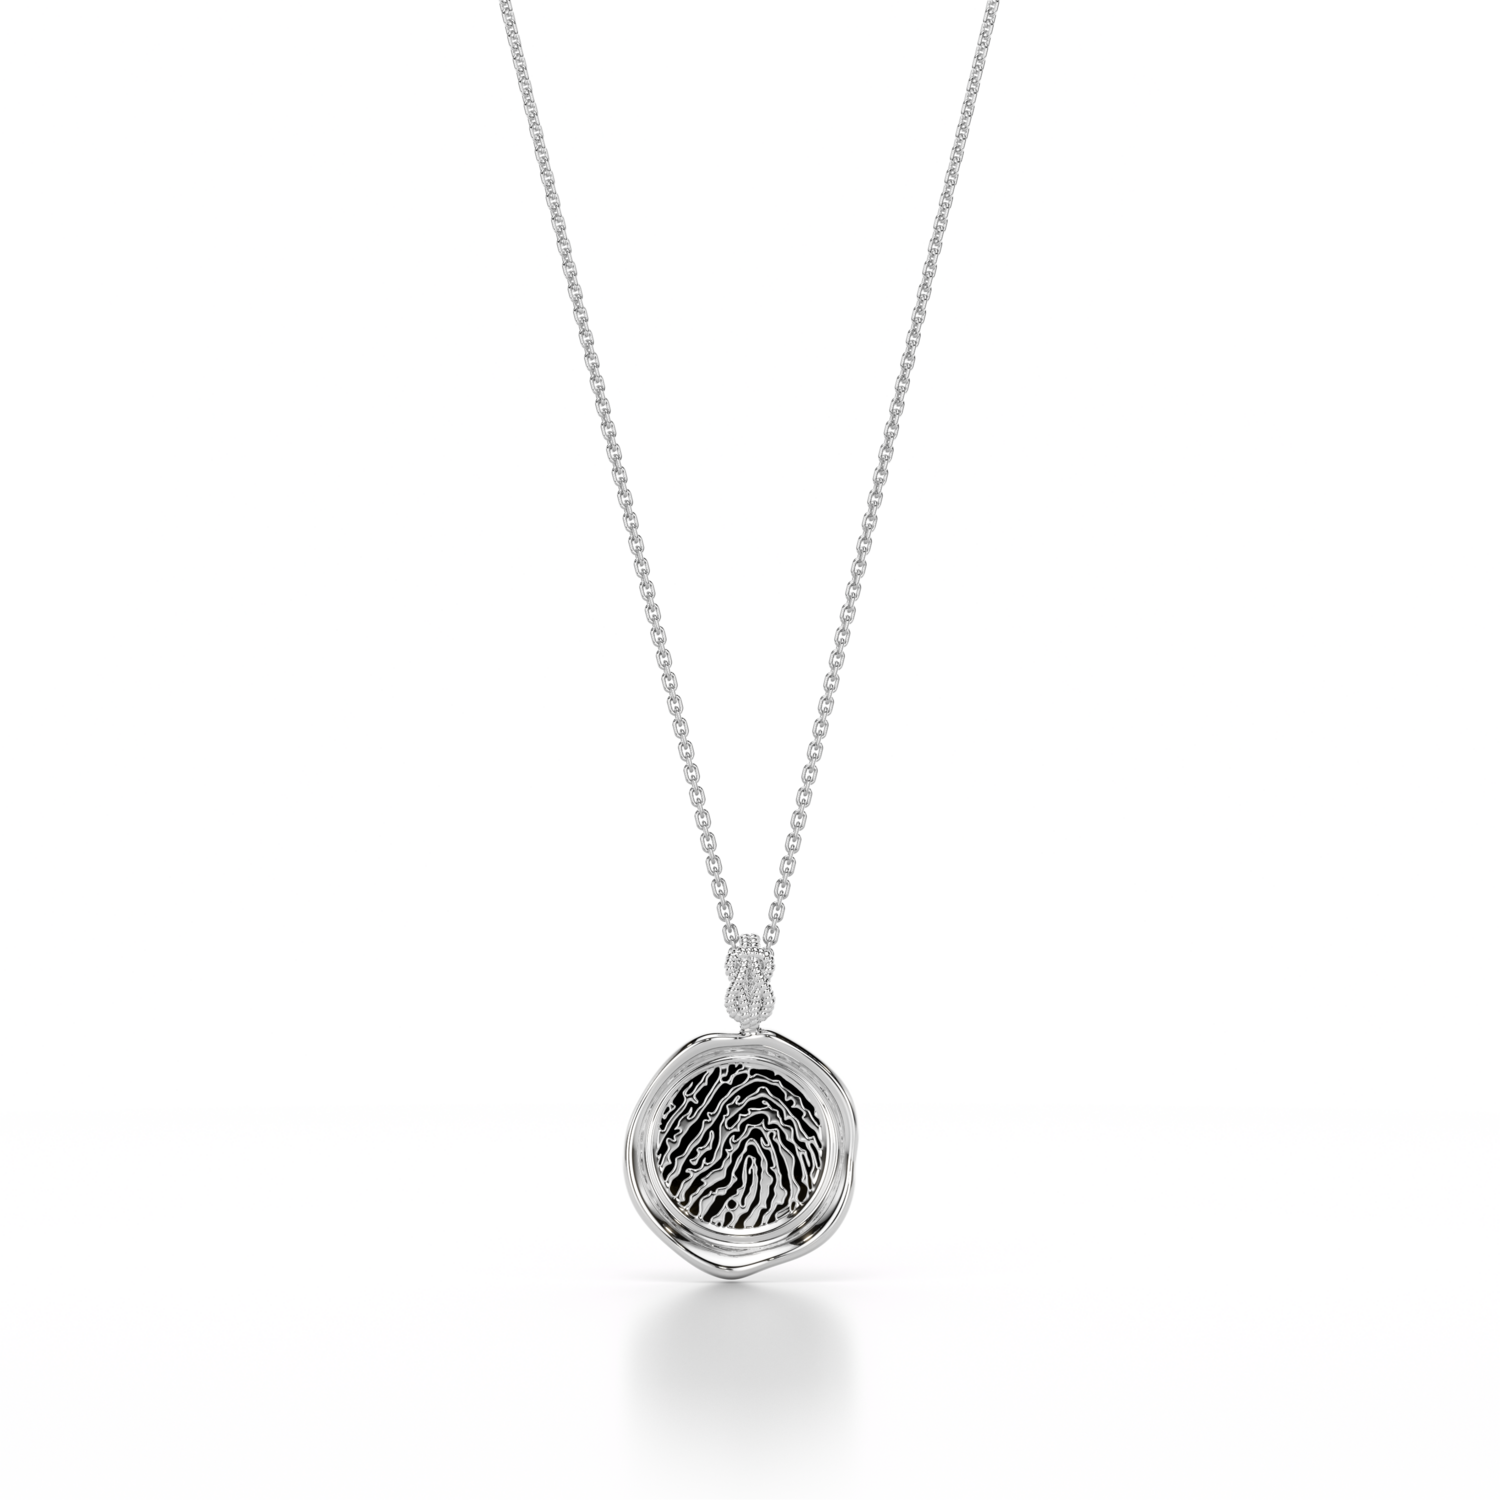 Forever-with-You White Gold Petite Round Gold Seal Necklace.